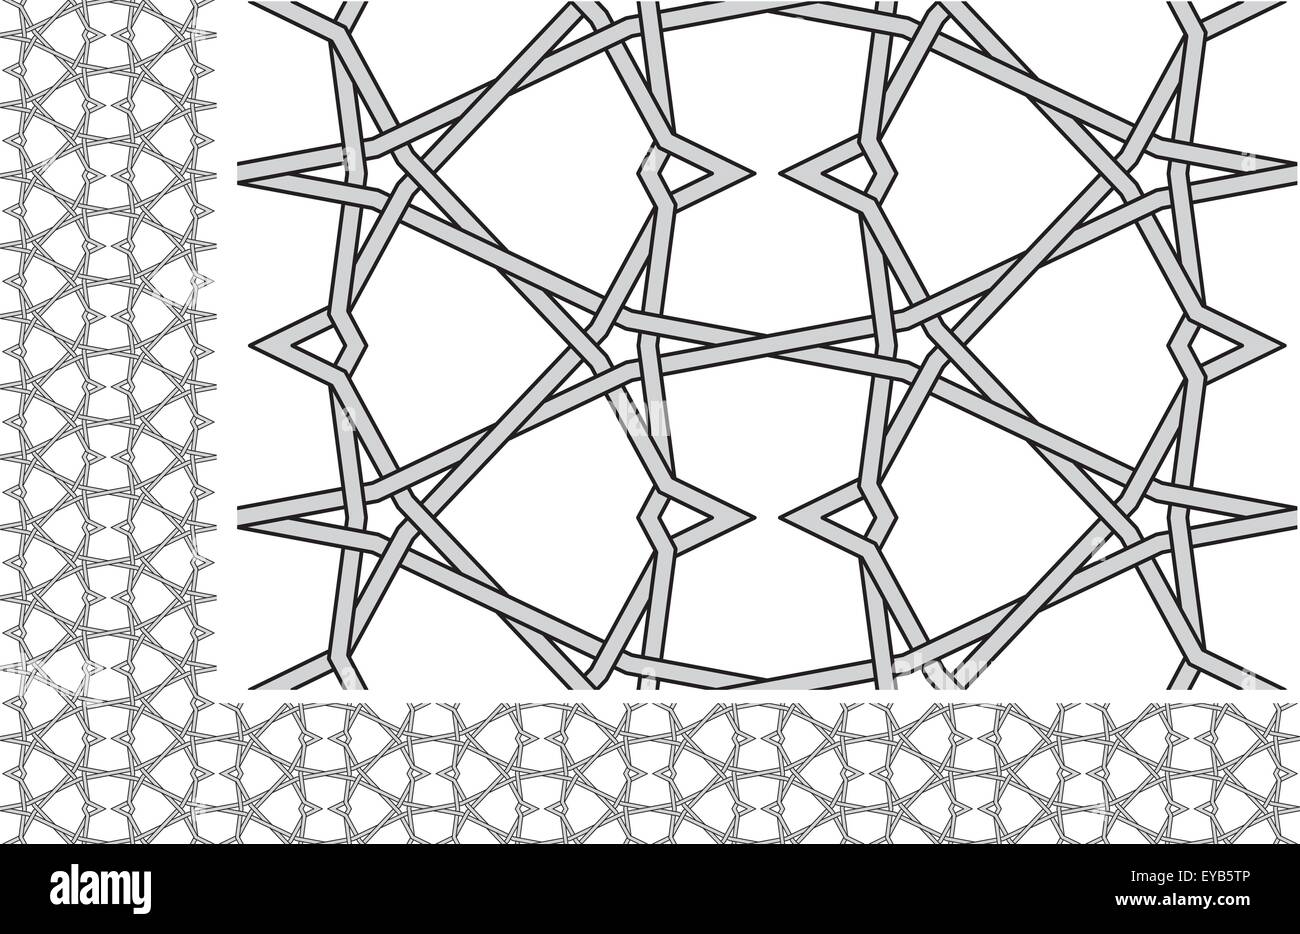 Seamless knitted wire pattern Stock Vector